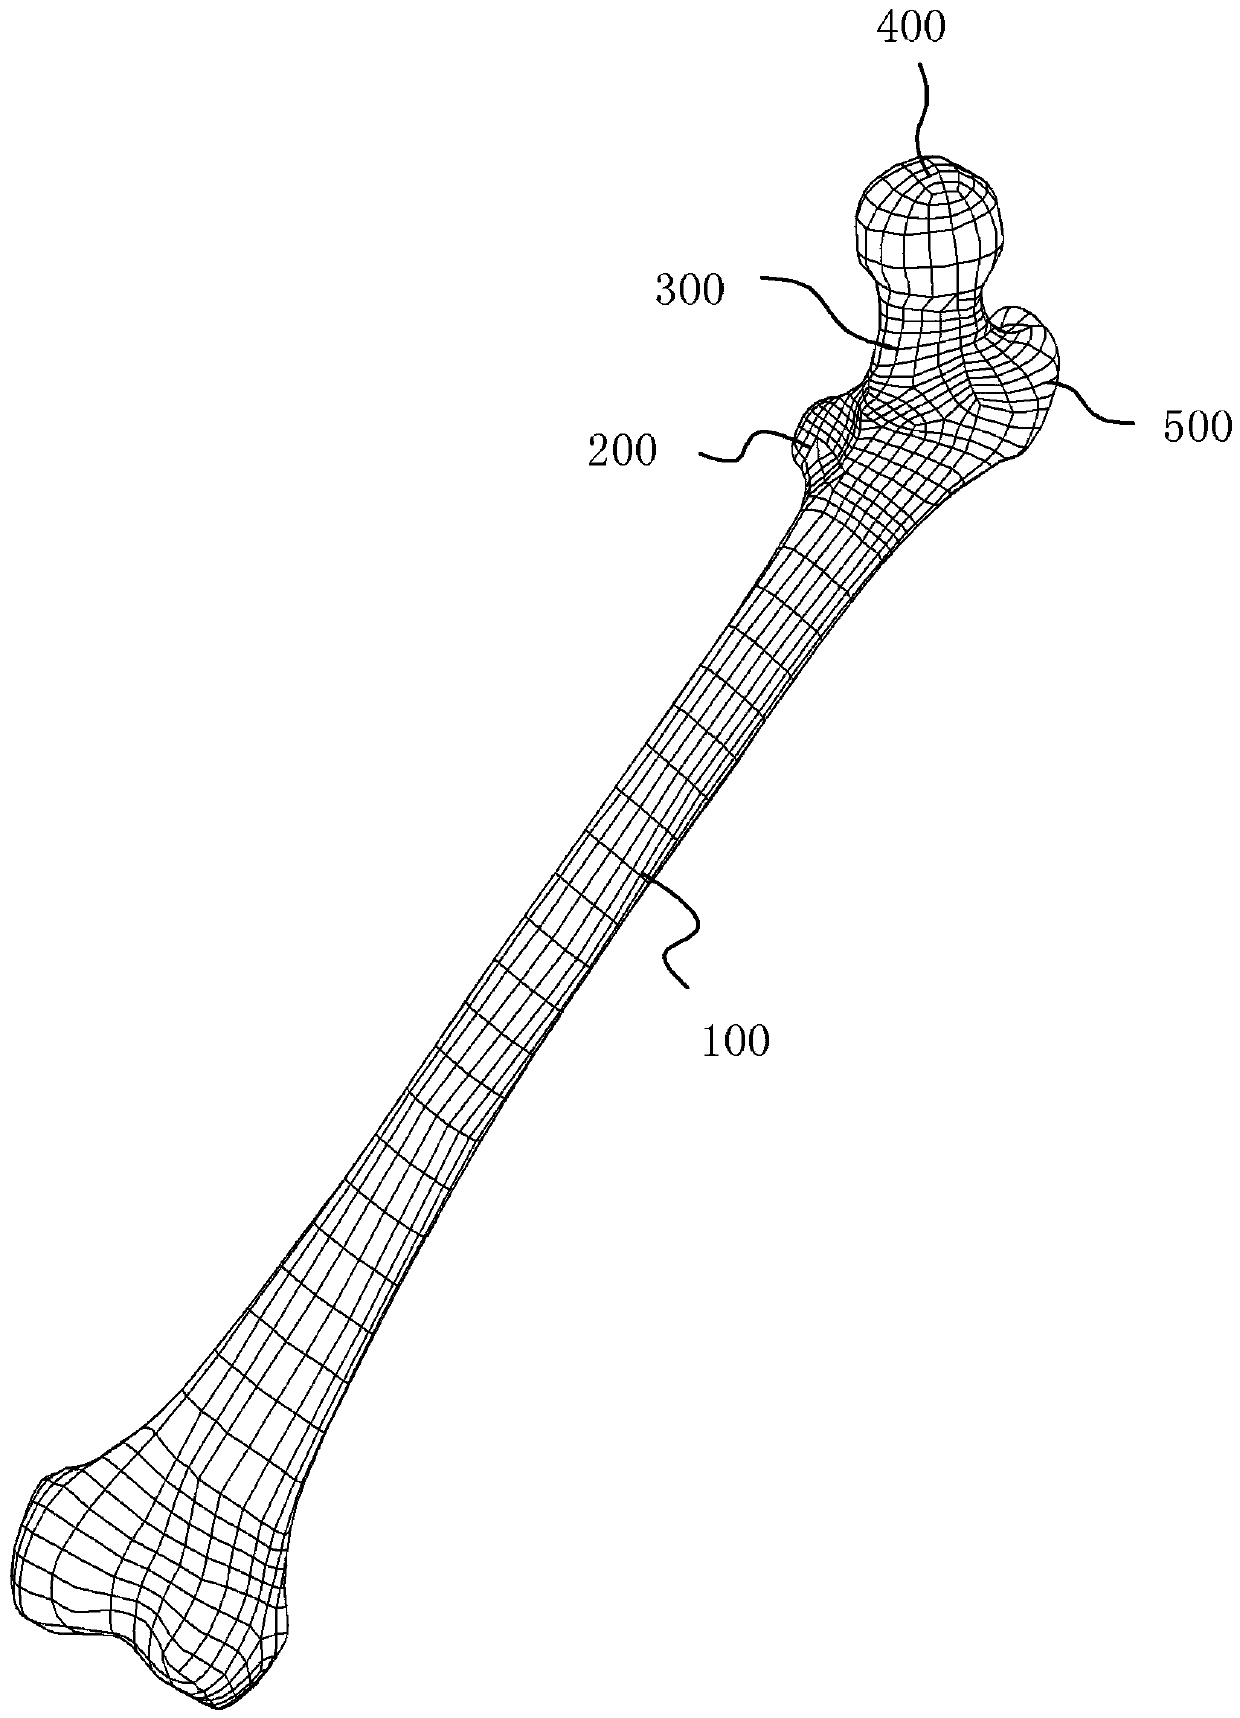 A three-dimensional reverse customized surgical navigator for femoral neck fracture